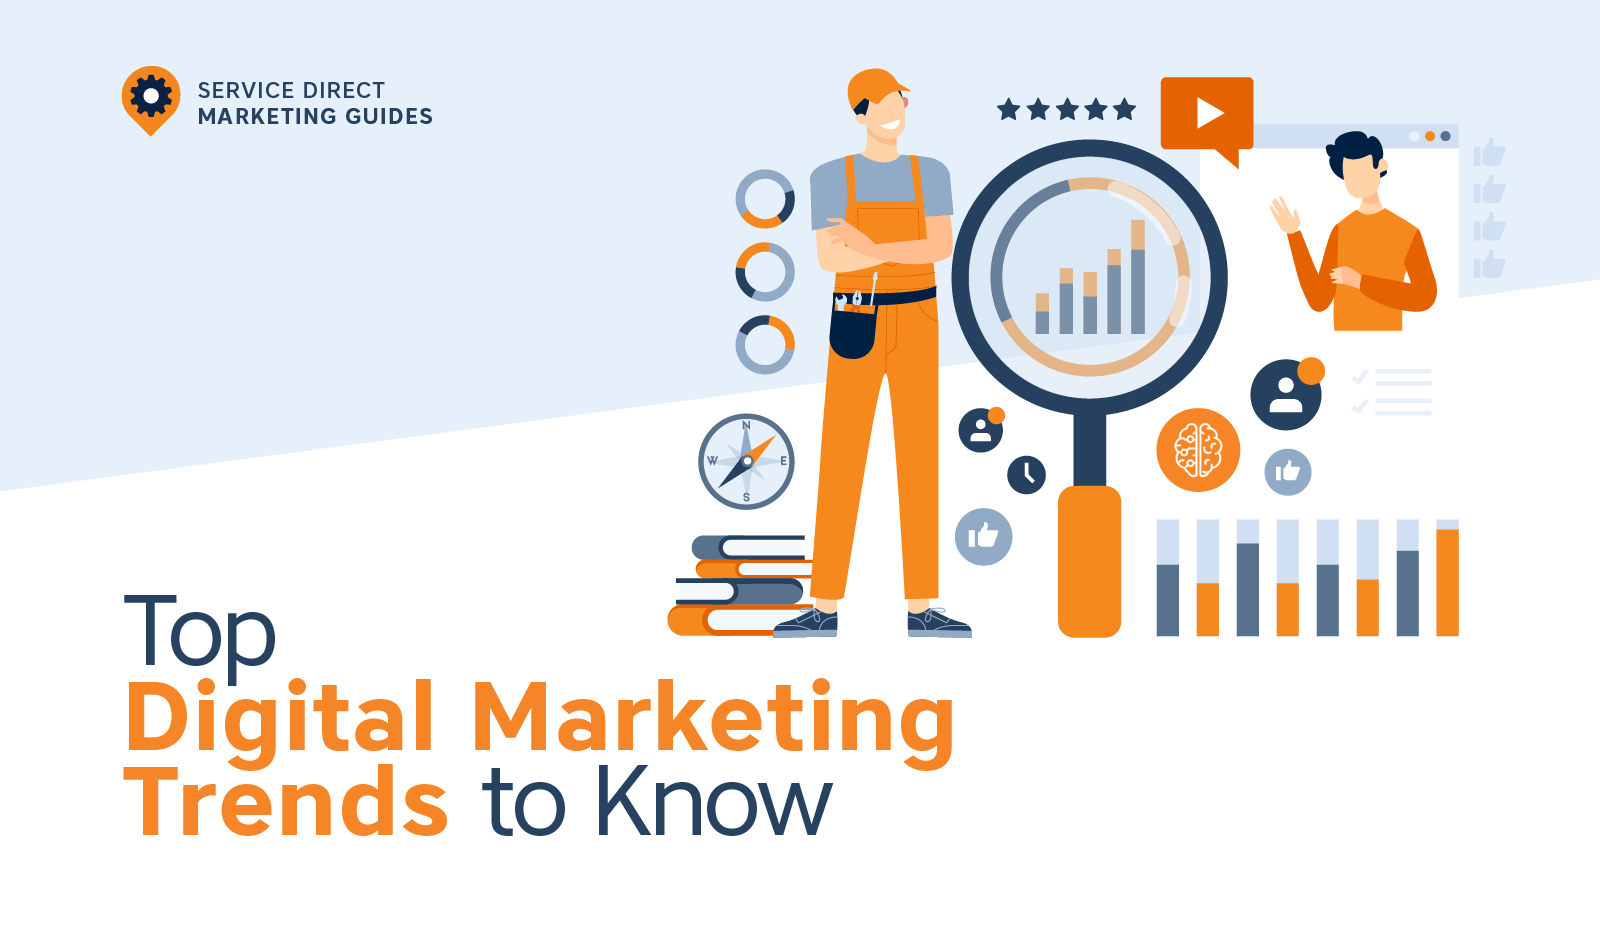 Top Digital Marketing Trends to Know Main Image